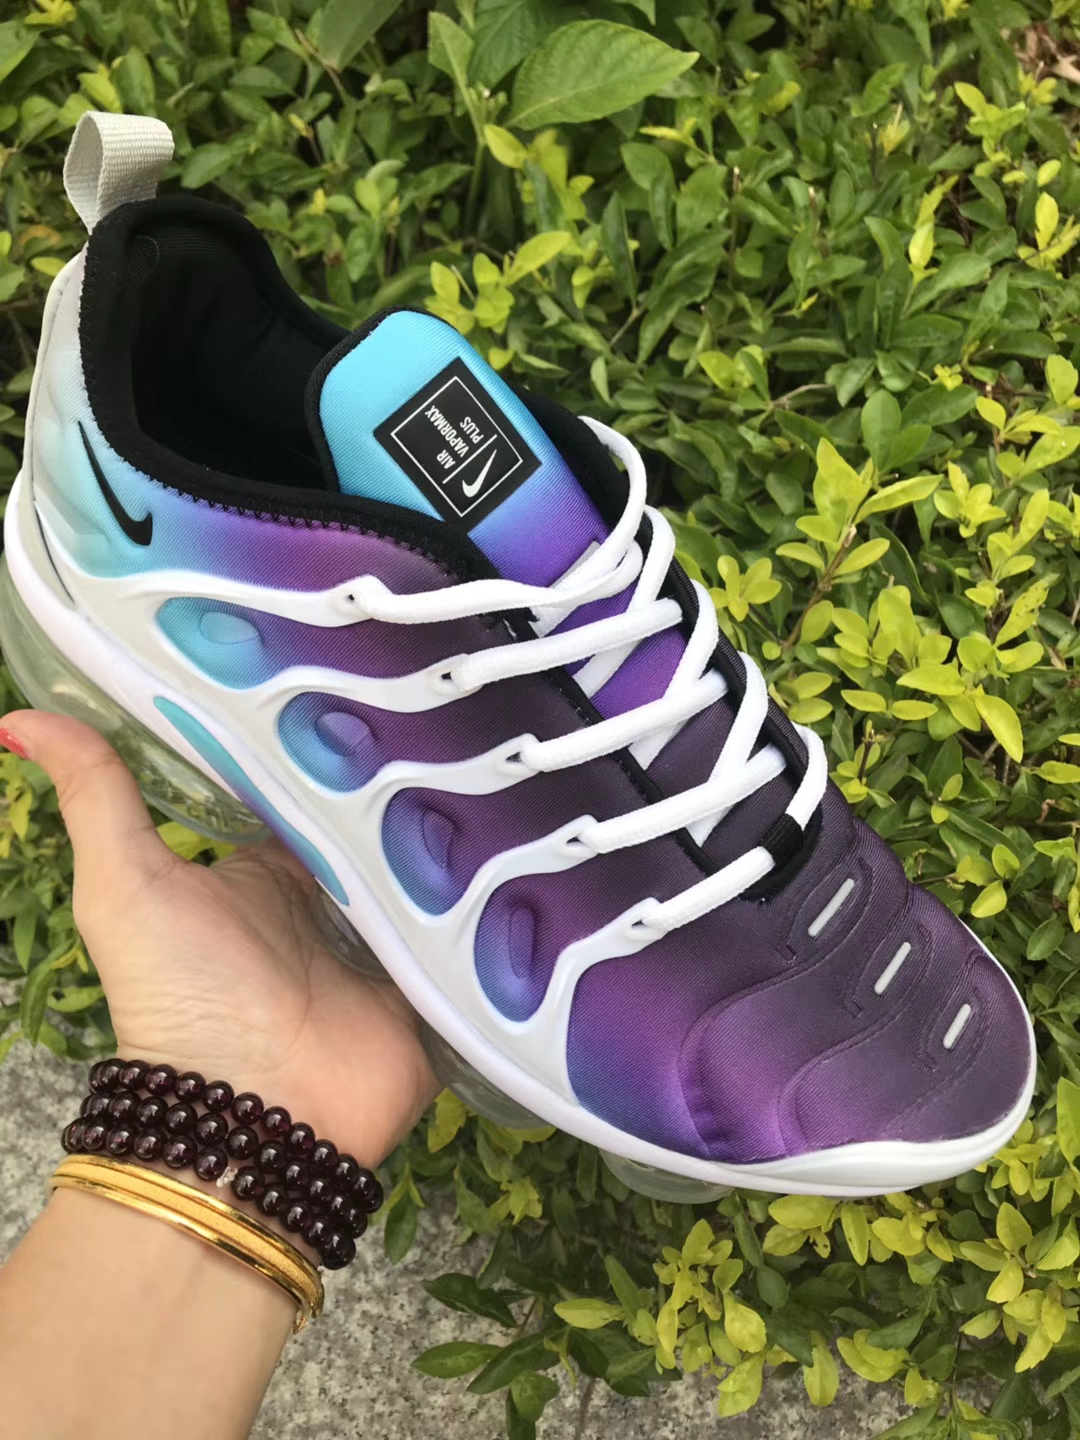 Women's Hot sale Running weapon Nike Air Max TN 2019 Shoes 002